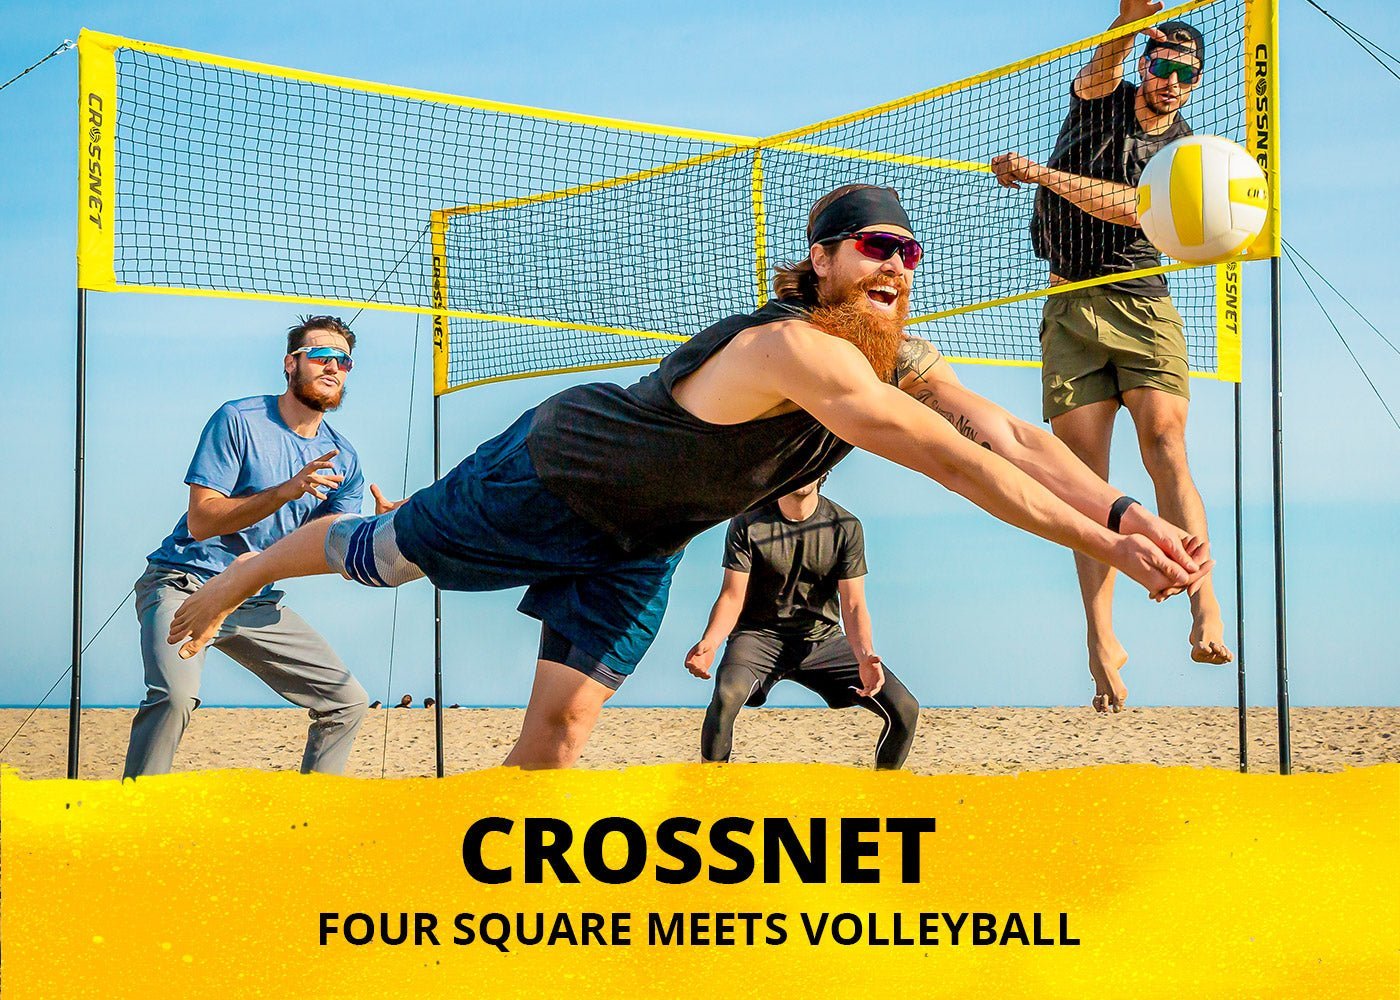 USA Volleyball x CROSSNET Limited Edition - CROSSNET